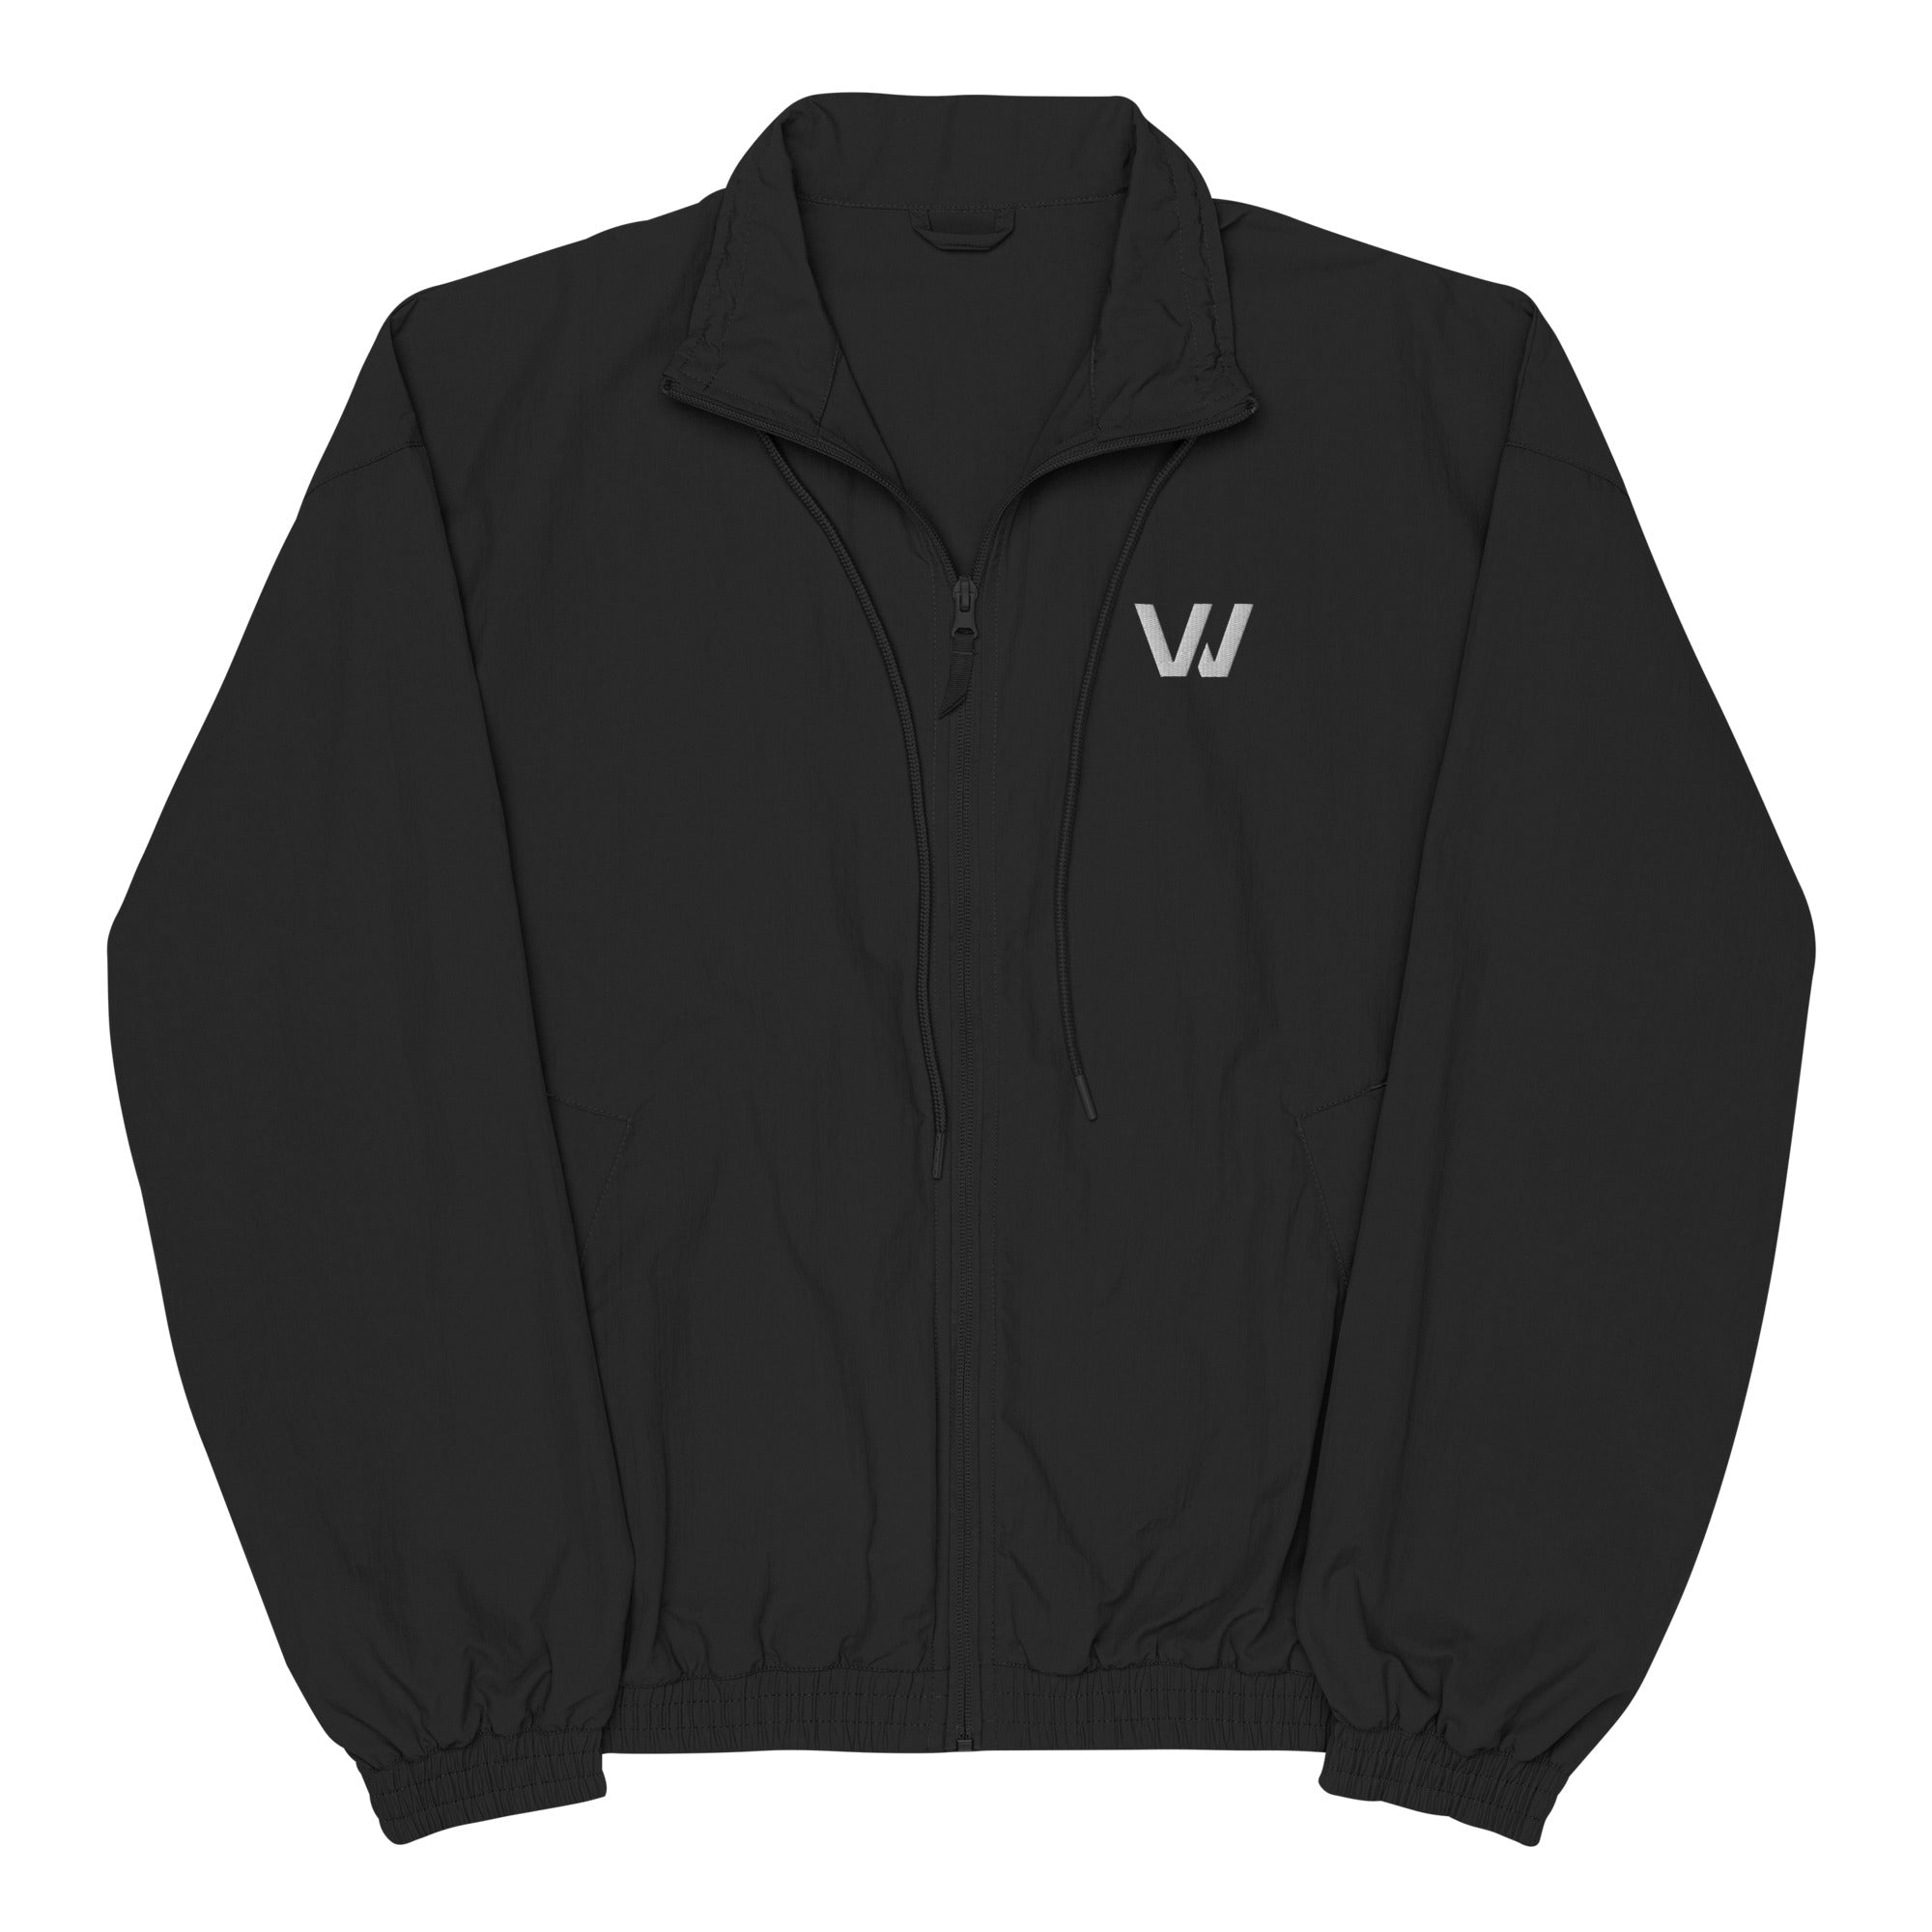 Black Classic Embroidered "W" Tracksuit Jacket